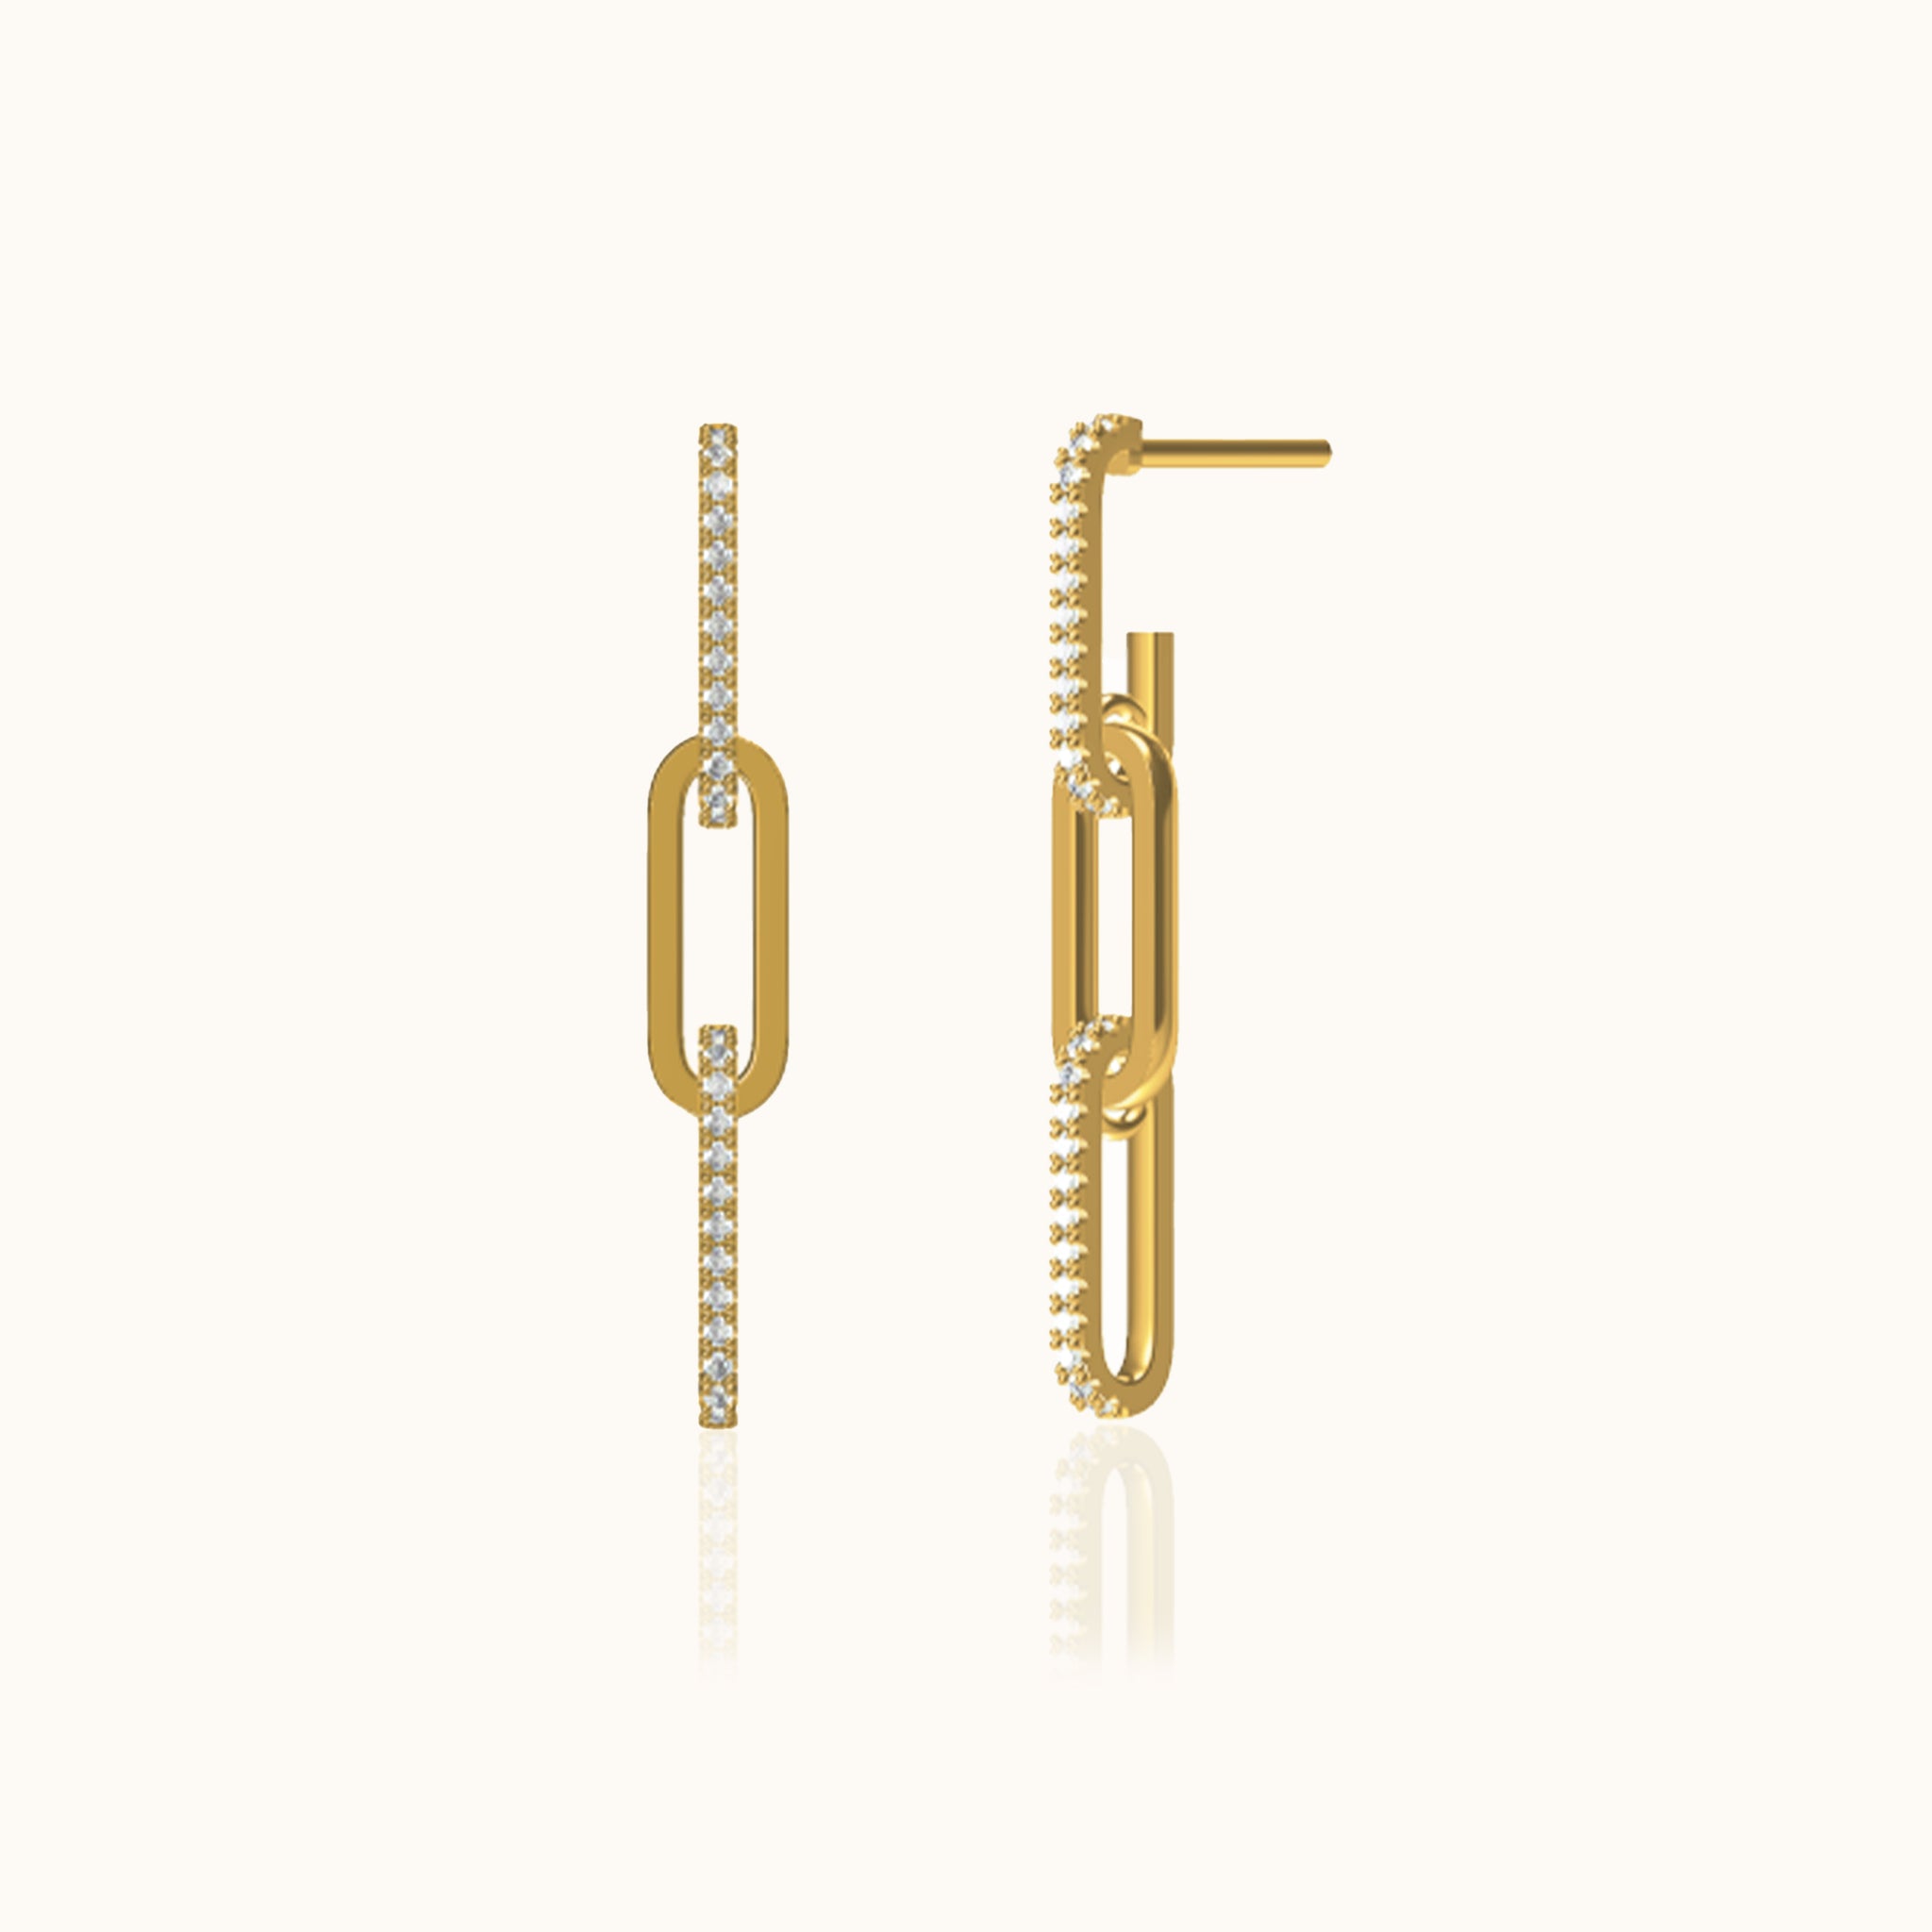 Classic Gold CZ Link Chain Dangle Studs Affordable Statement Earrings by Doviana